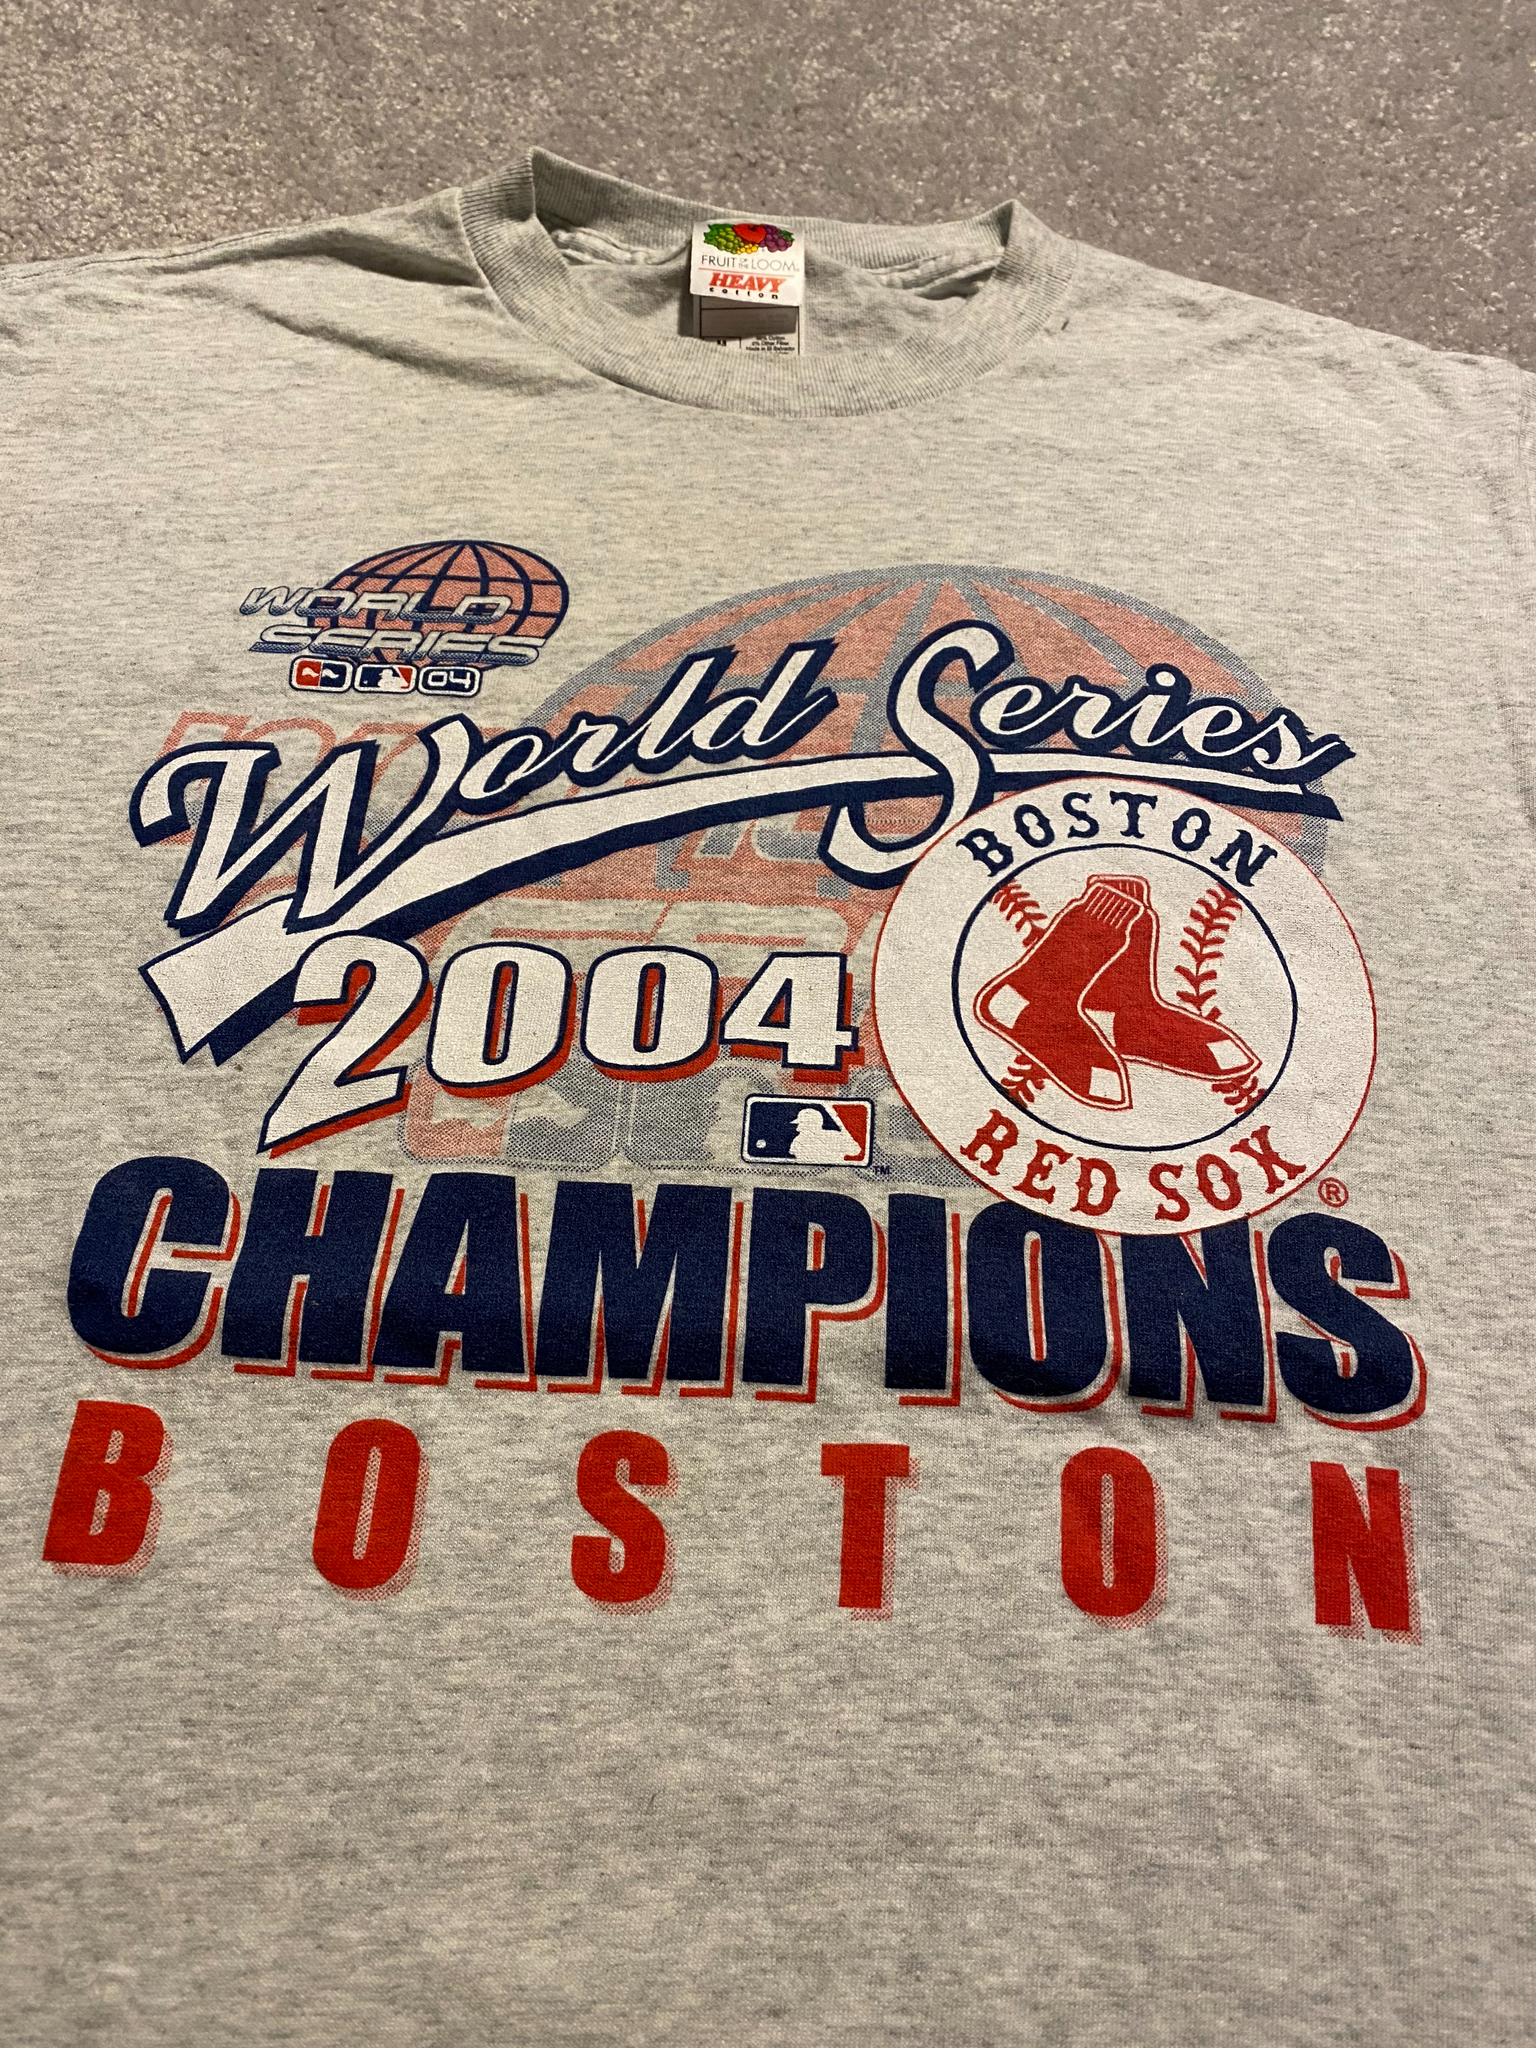 Vintage 2004 Boston Red Sox World Series Champions Long Sleeve Tshirt - Youth Large / Adult Xs/S